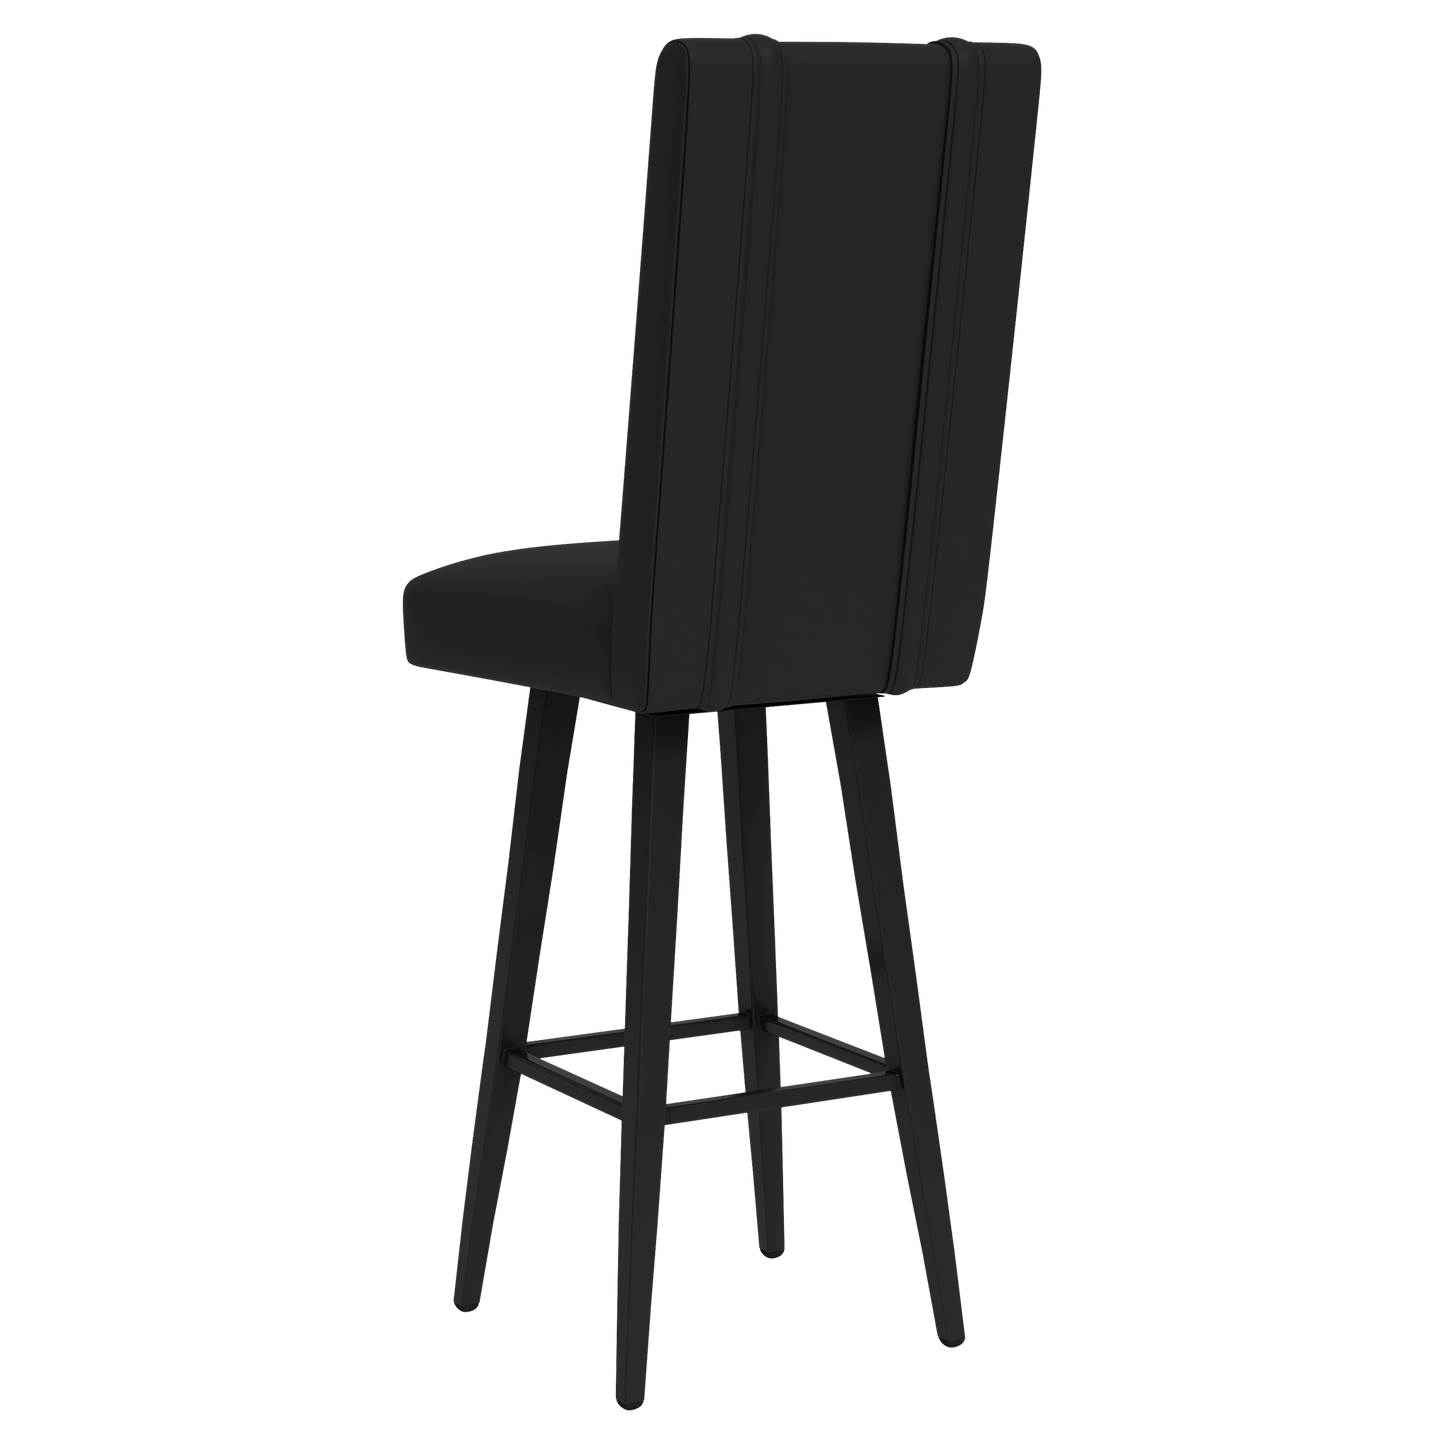 Swivel Bar Stool 2000 with Tampa Bay Rays Cooperstown Secondary